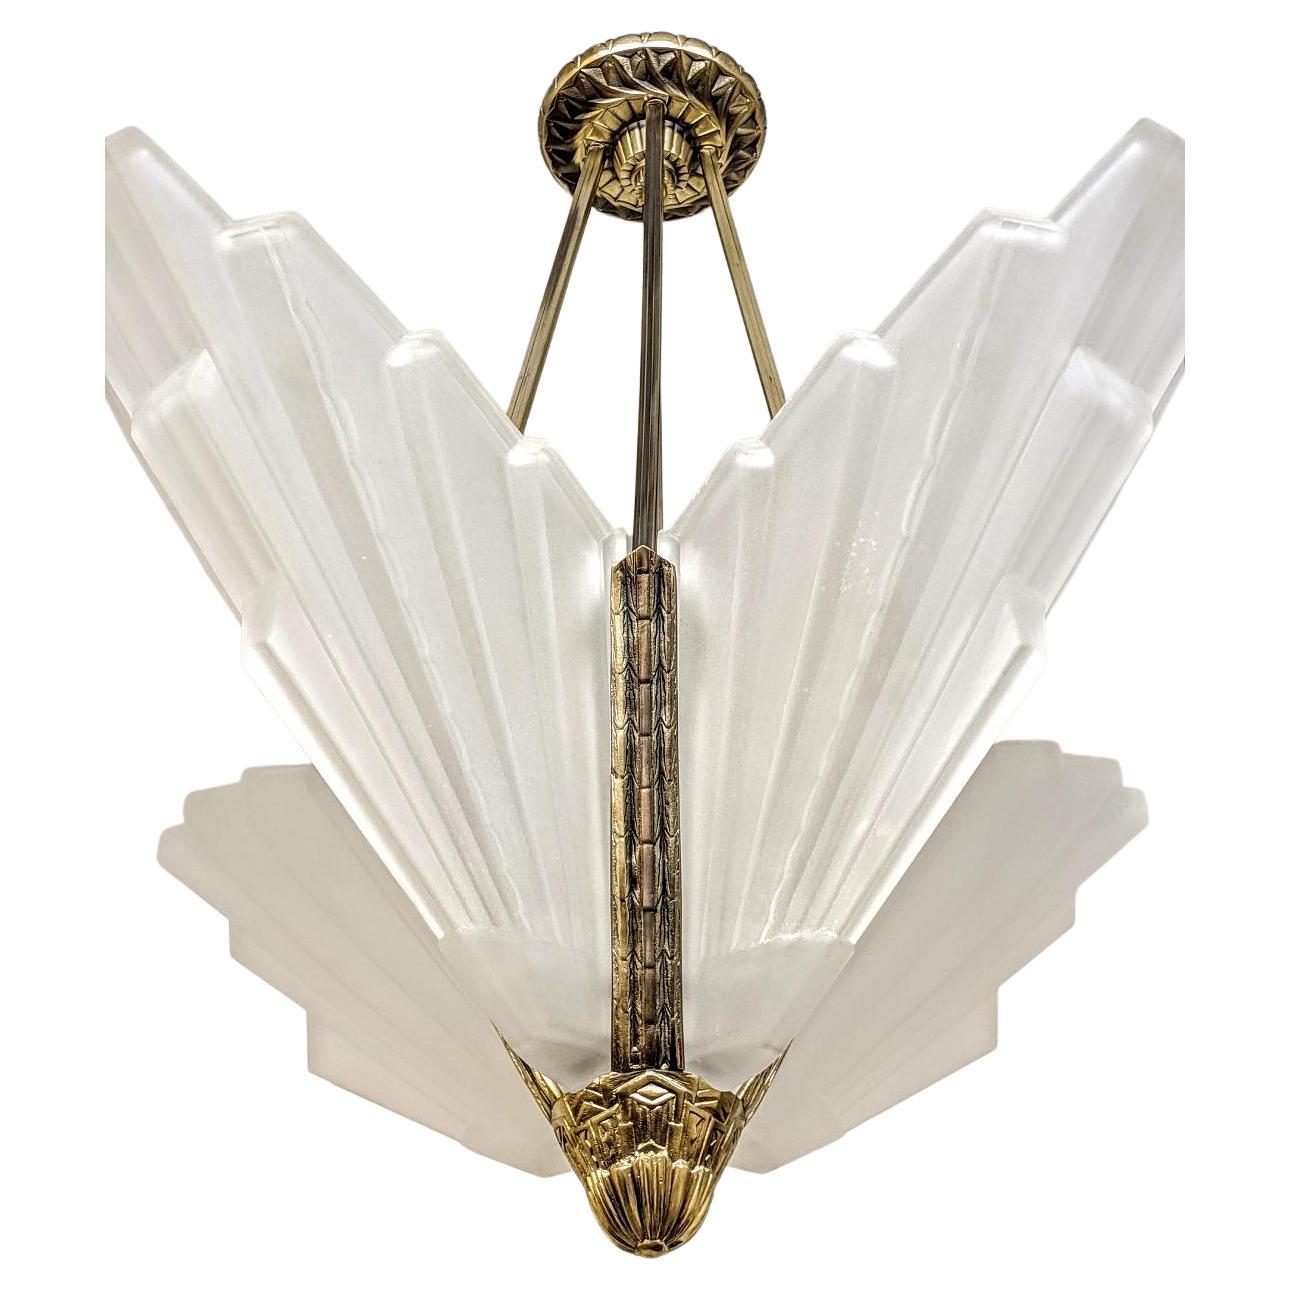 A French Art Deco bronze geometric design chandelier created by the French master 